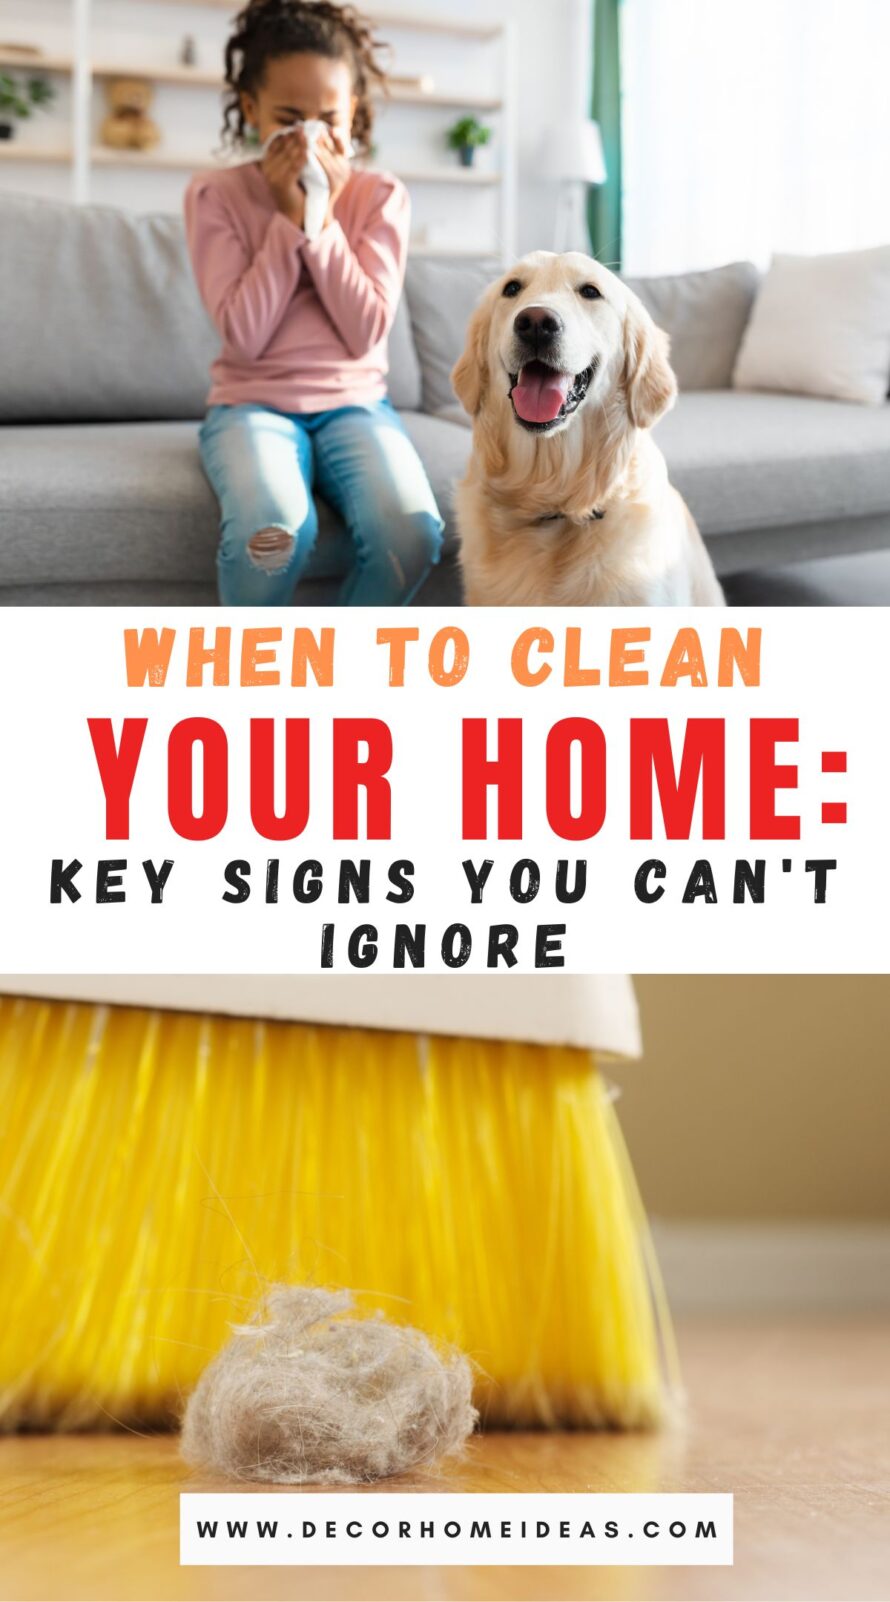 Discover the key signs that indicate it's time to clean your home. From lingering odors to dusty surfaces, learn when to tackle household chores for a fresh and inviting living space.